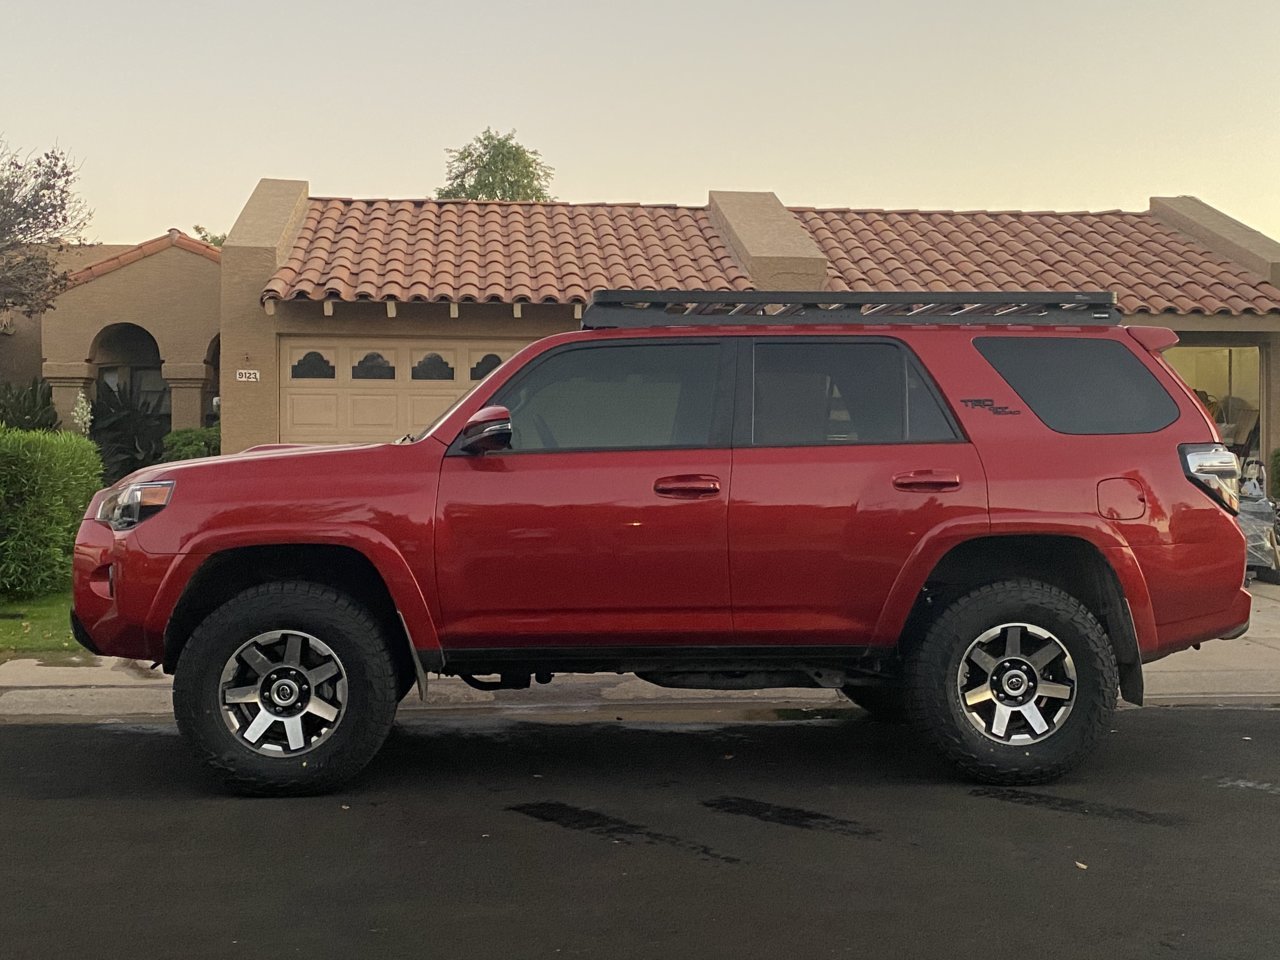 275 70 17 or 285 70 17 with my 2" lift? | Toyota 4Runner Forum